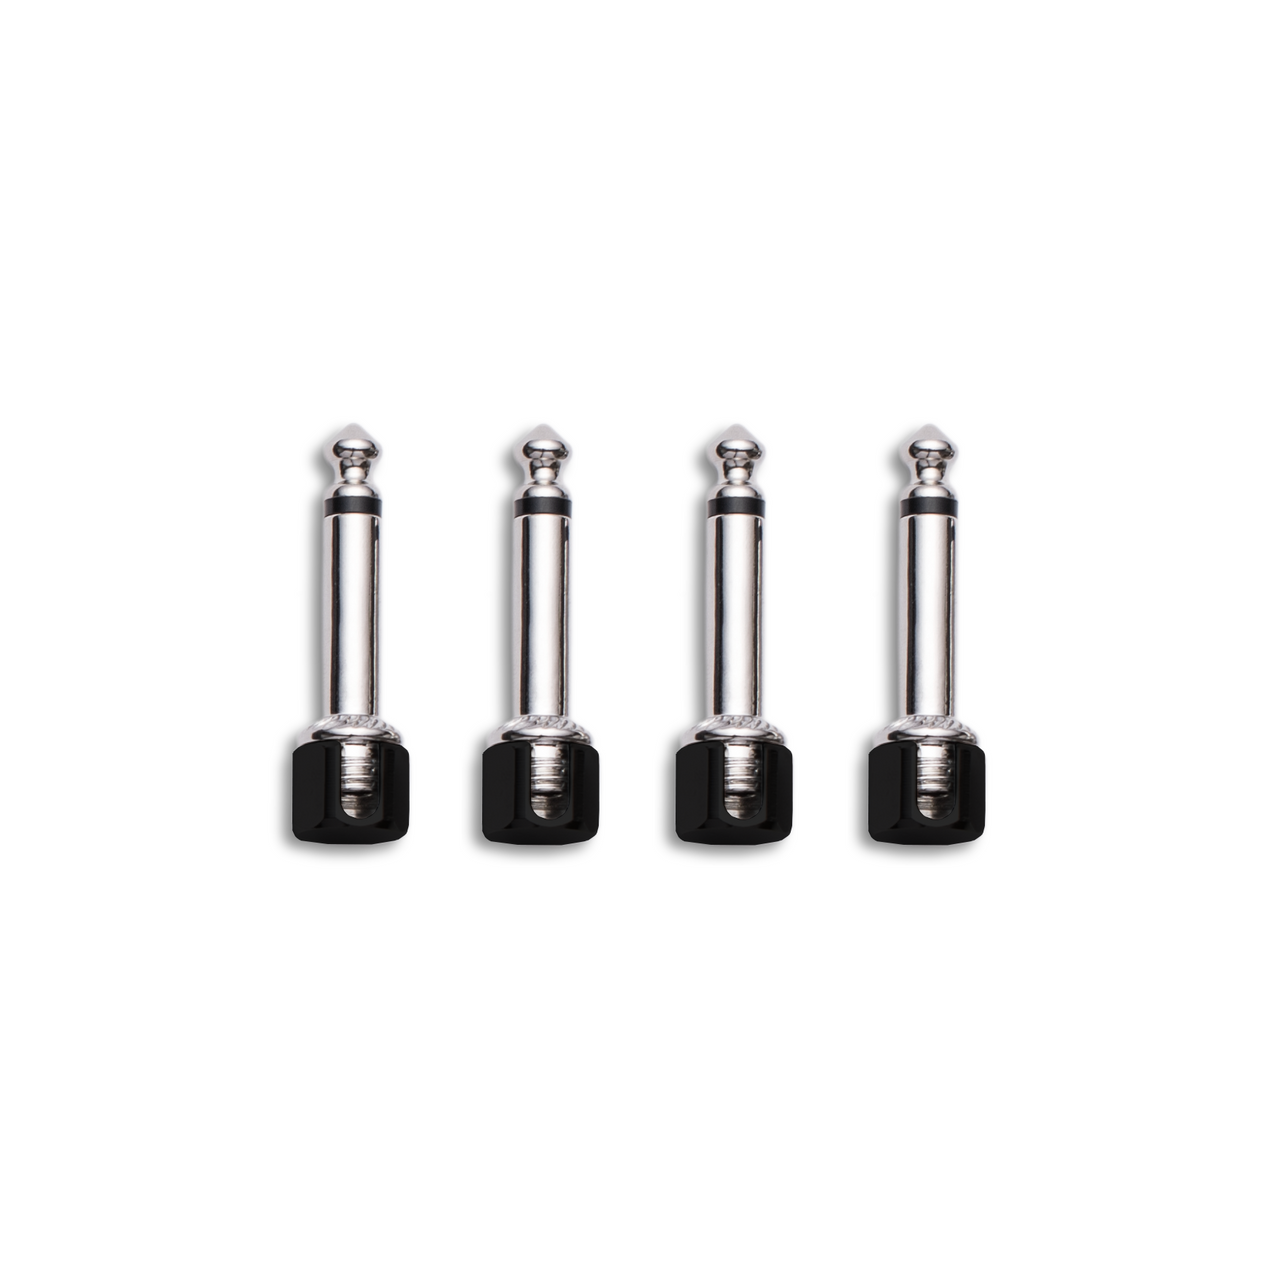 4 x Evidence Audio Right-Angled SIS Plug with Black Cap